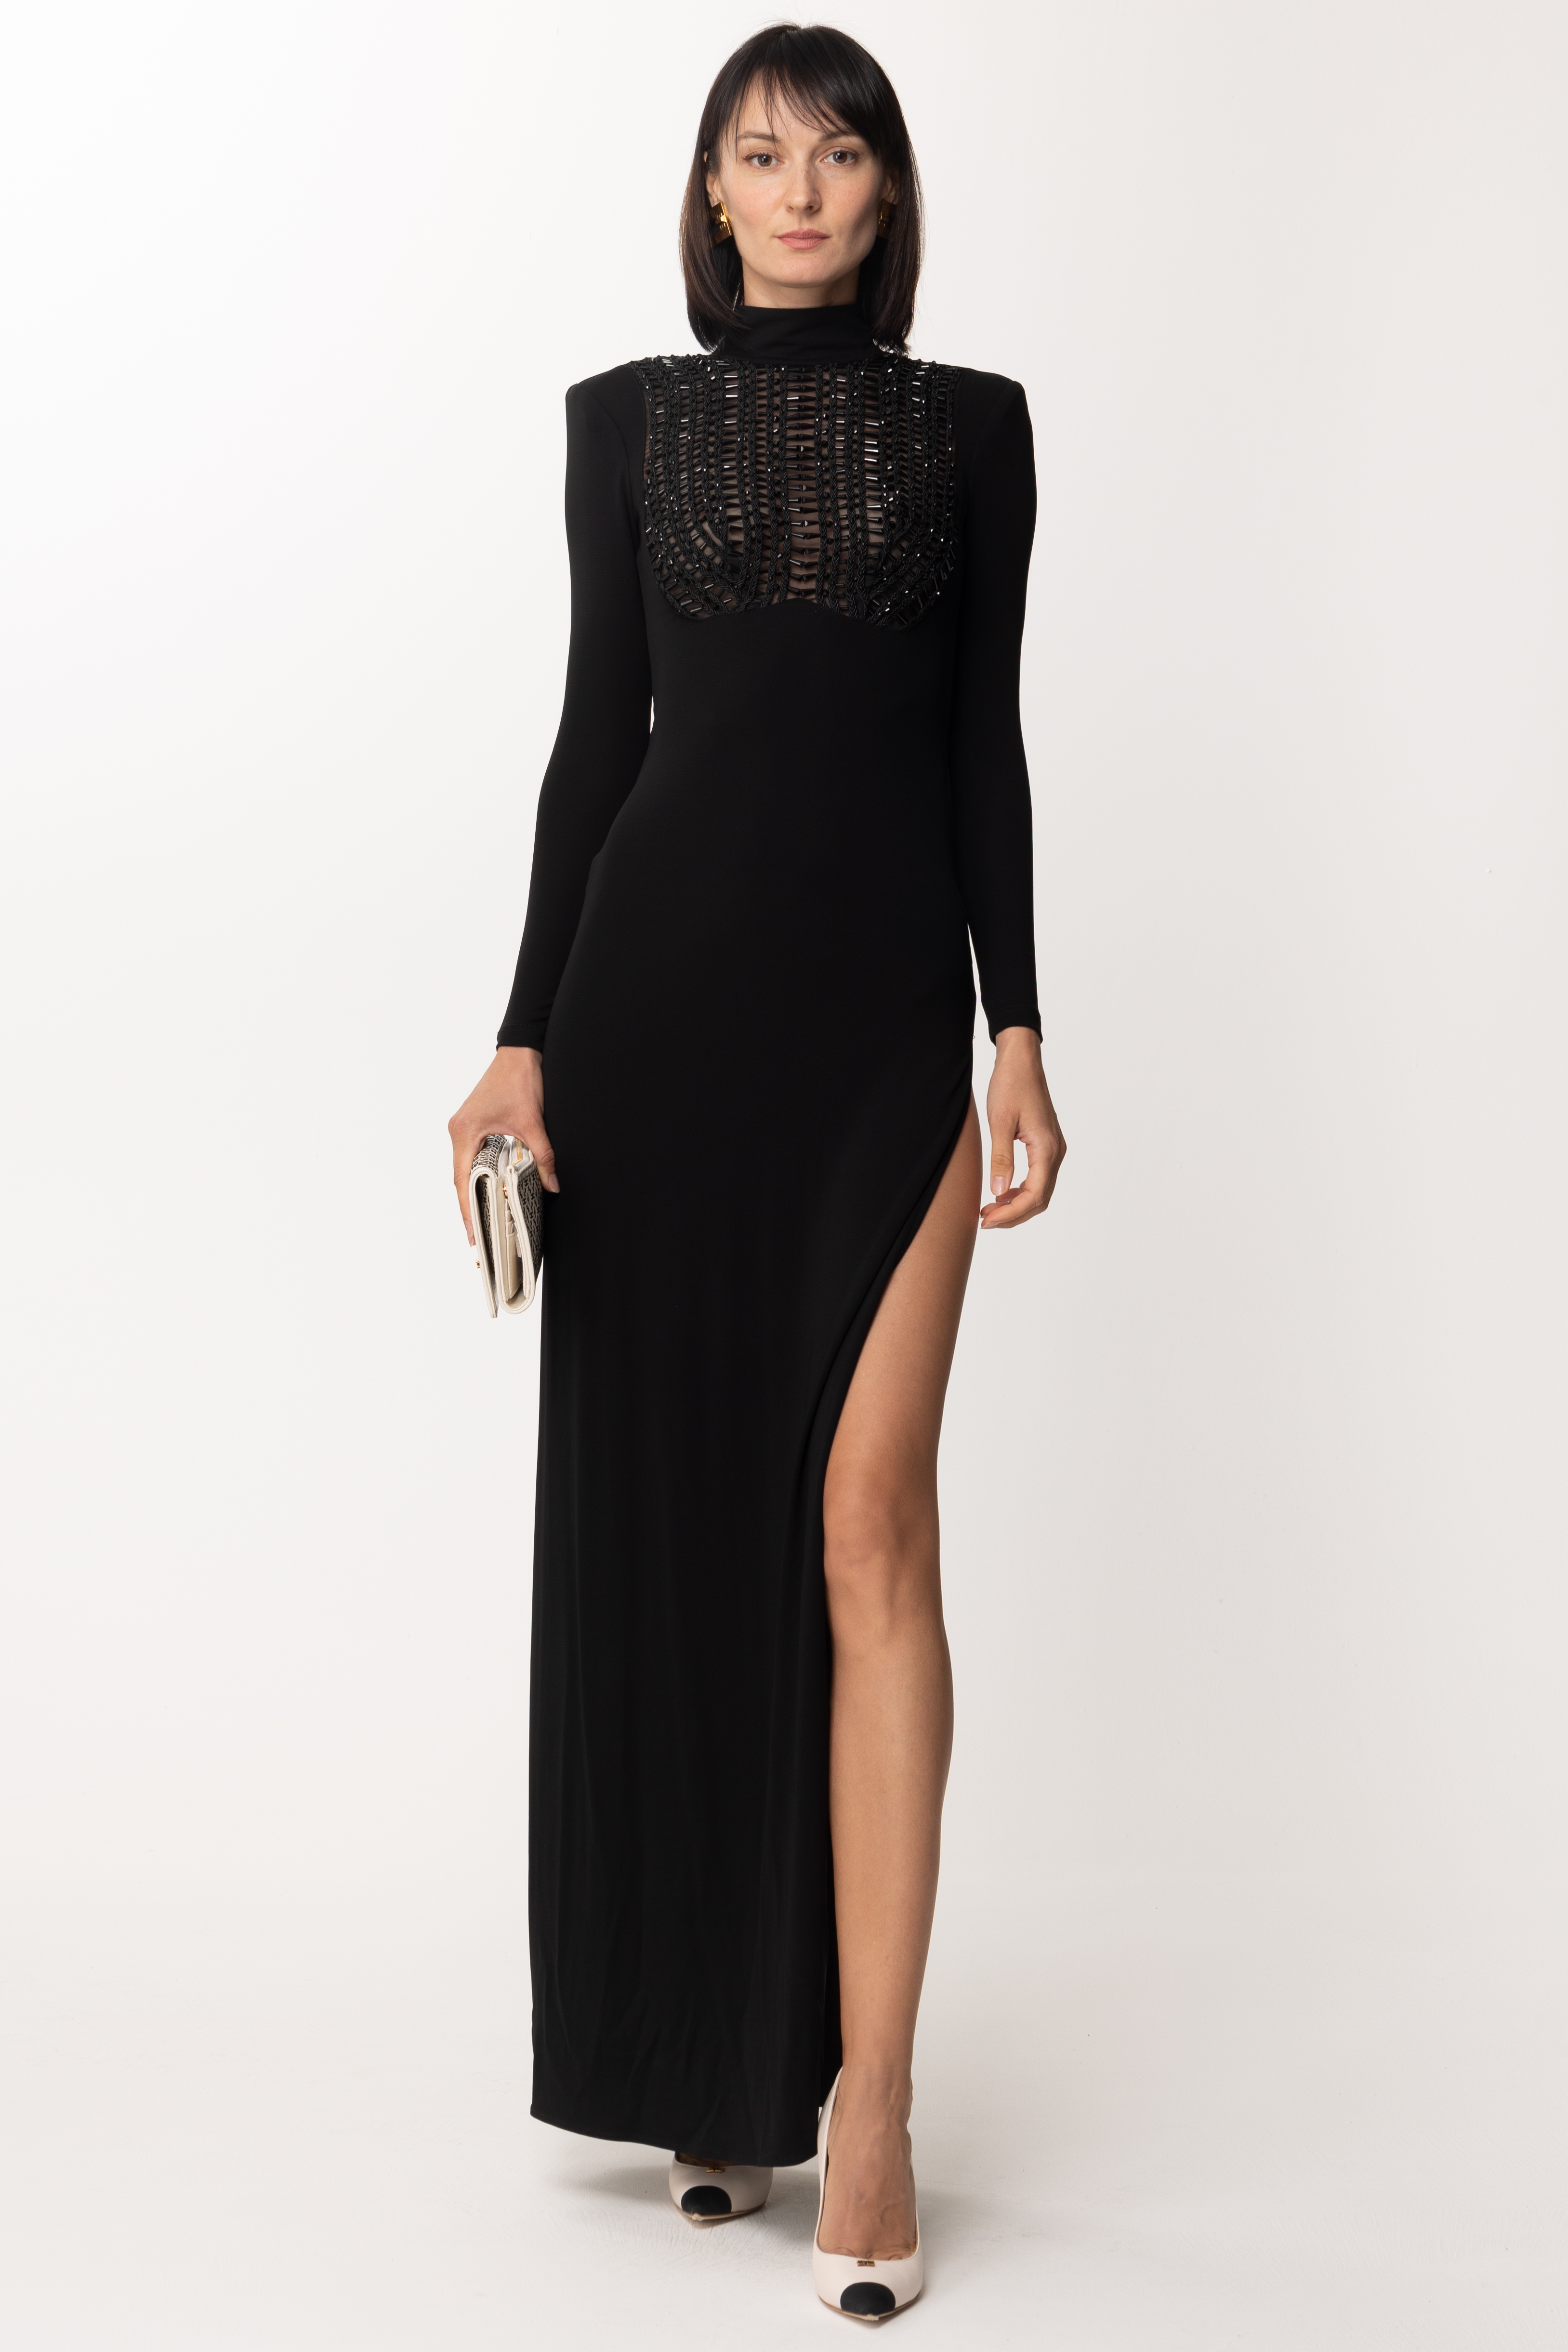 Preview: Elisabetta Franchi Red Carpet dress with embroidered plastron Nero